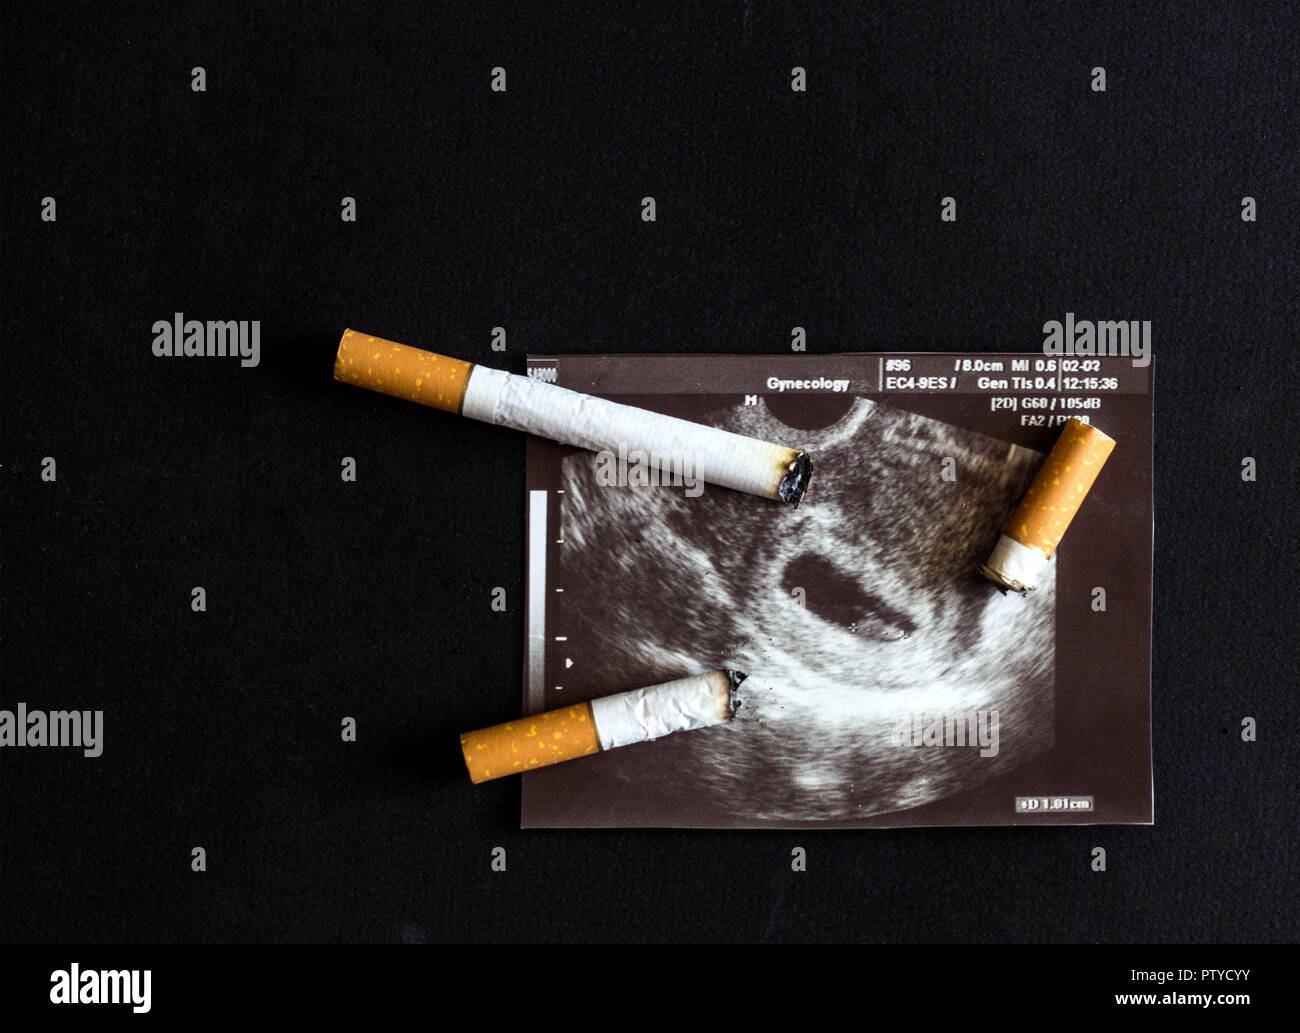 Cigarette cigarette stubs extinguished about a shot of pregnancy, pregnancy and smoking, cigarette and gestation Stock Photo